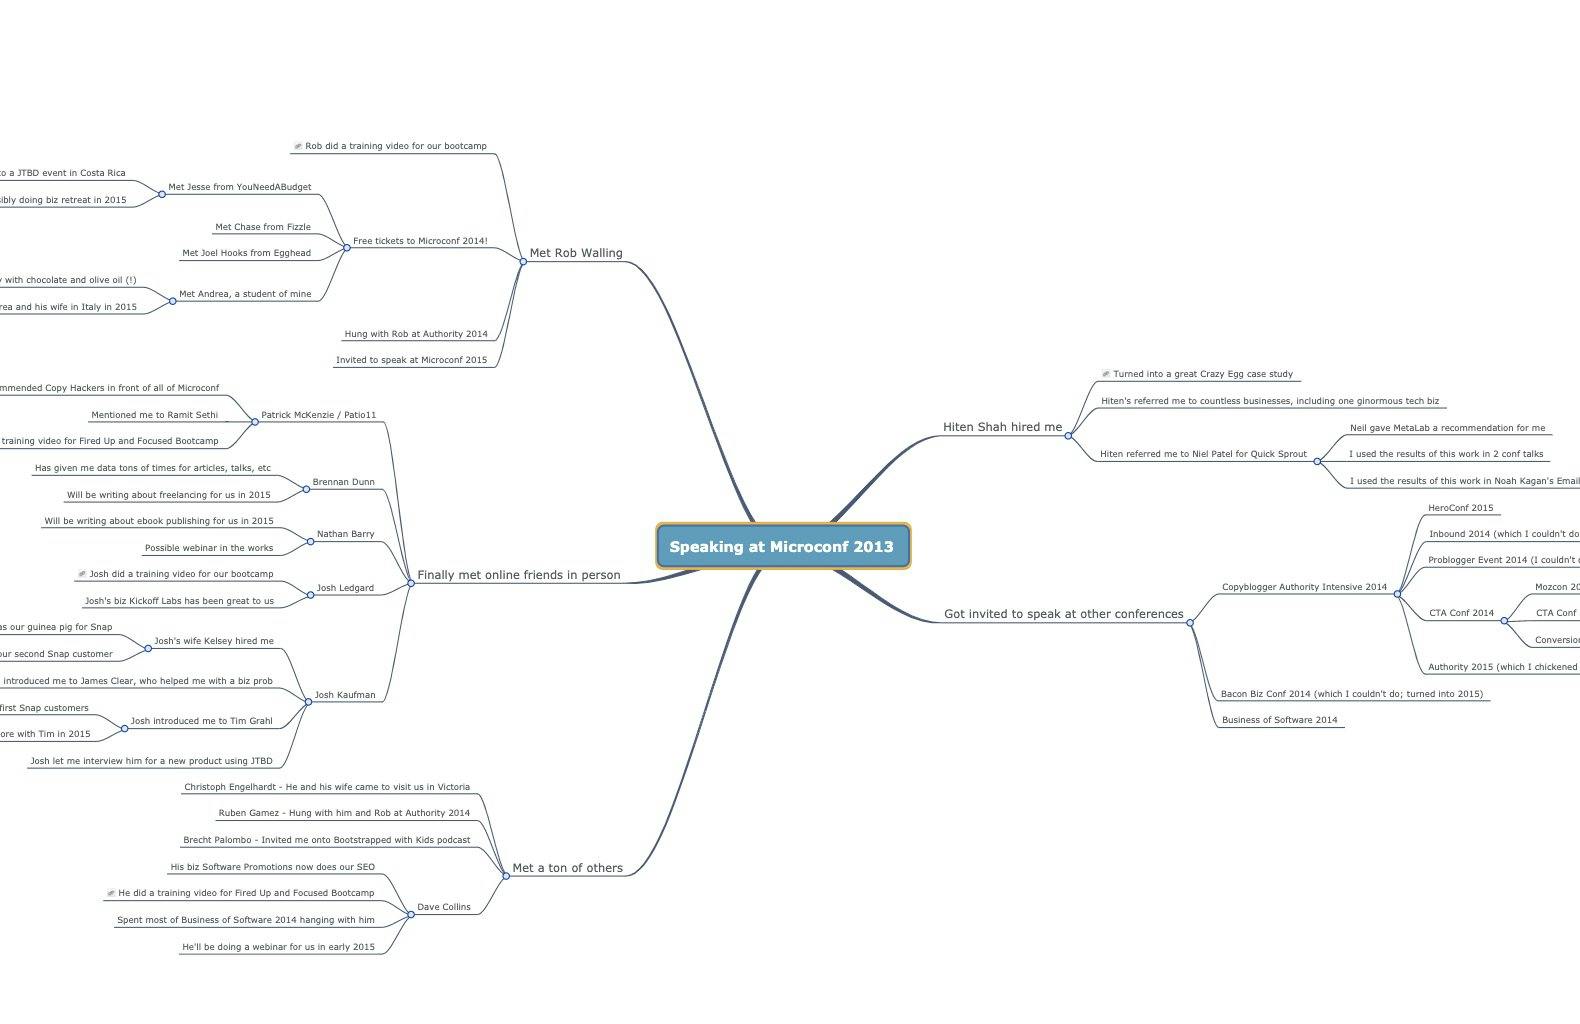 Mind map of the impact of Joanna's microconf talk